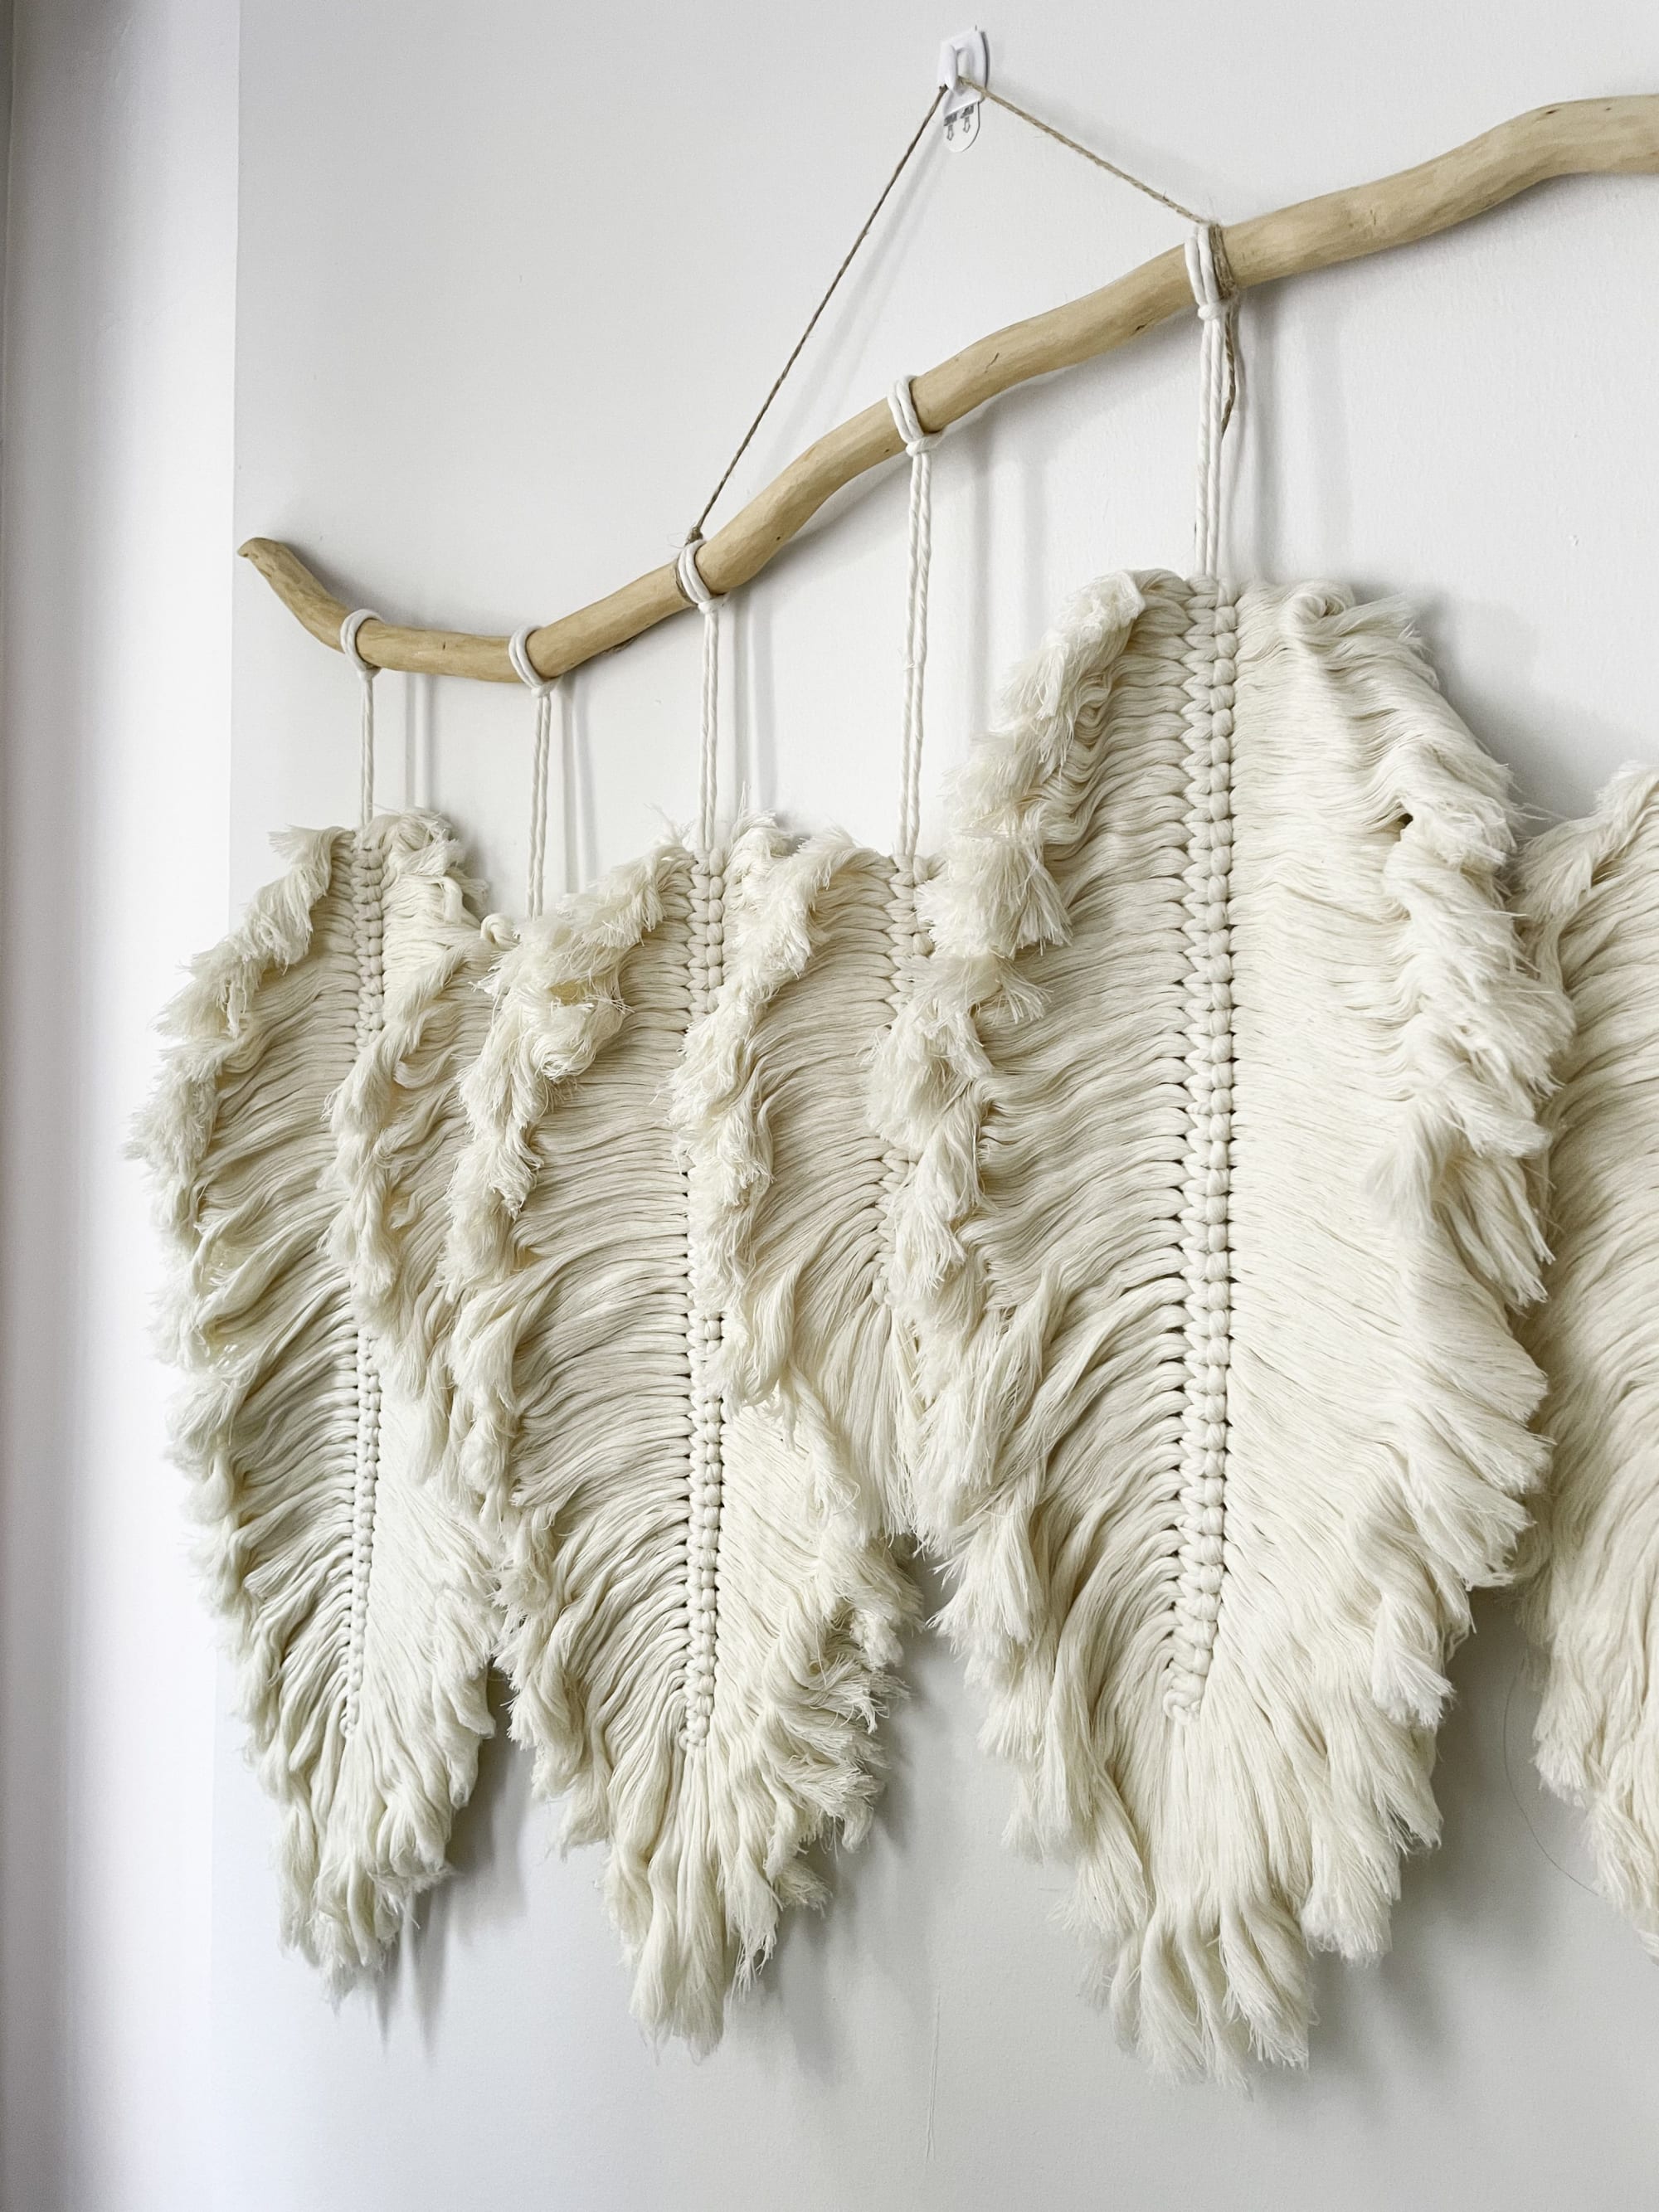 Large Macrame Feathers with 10 feathers